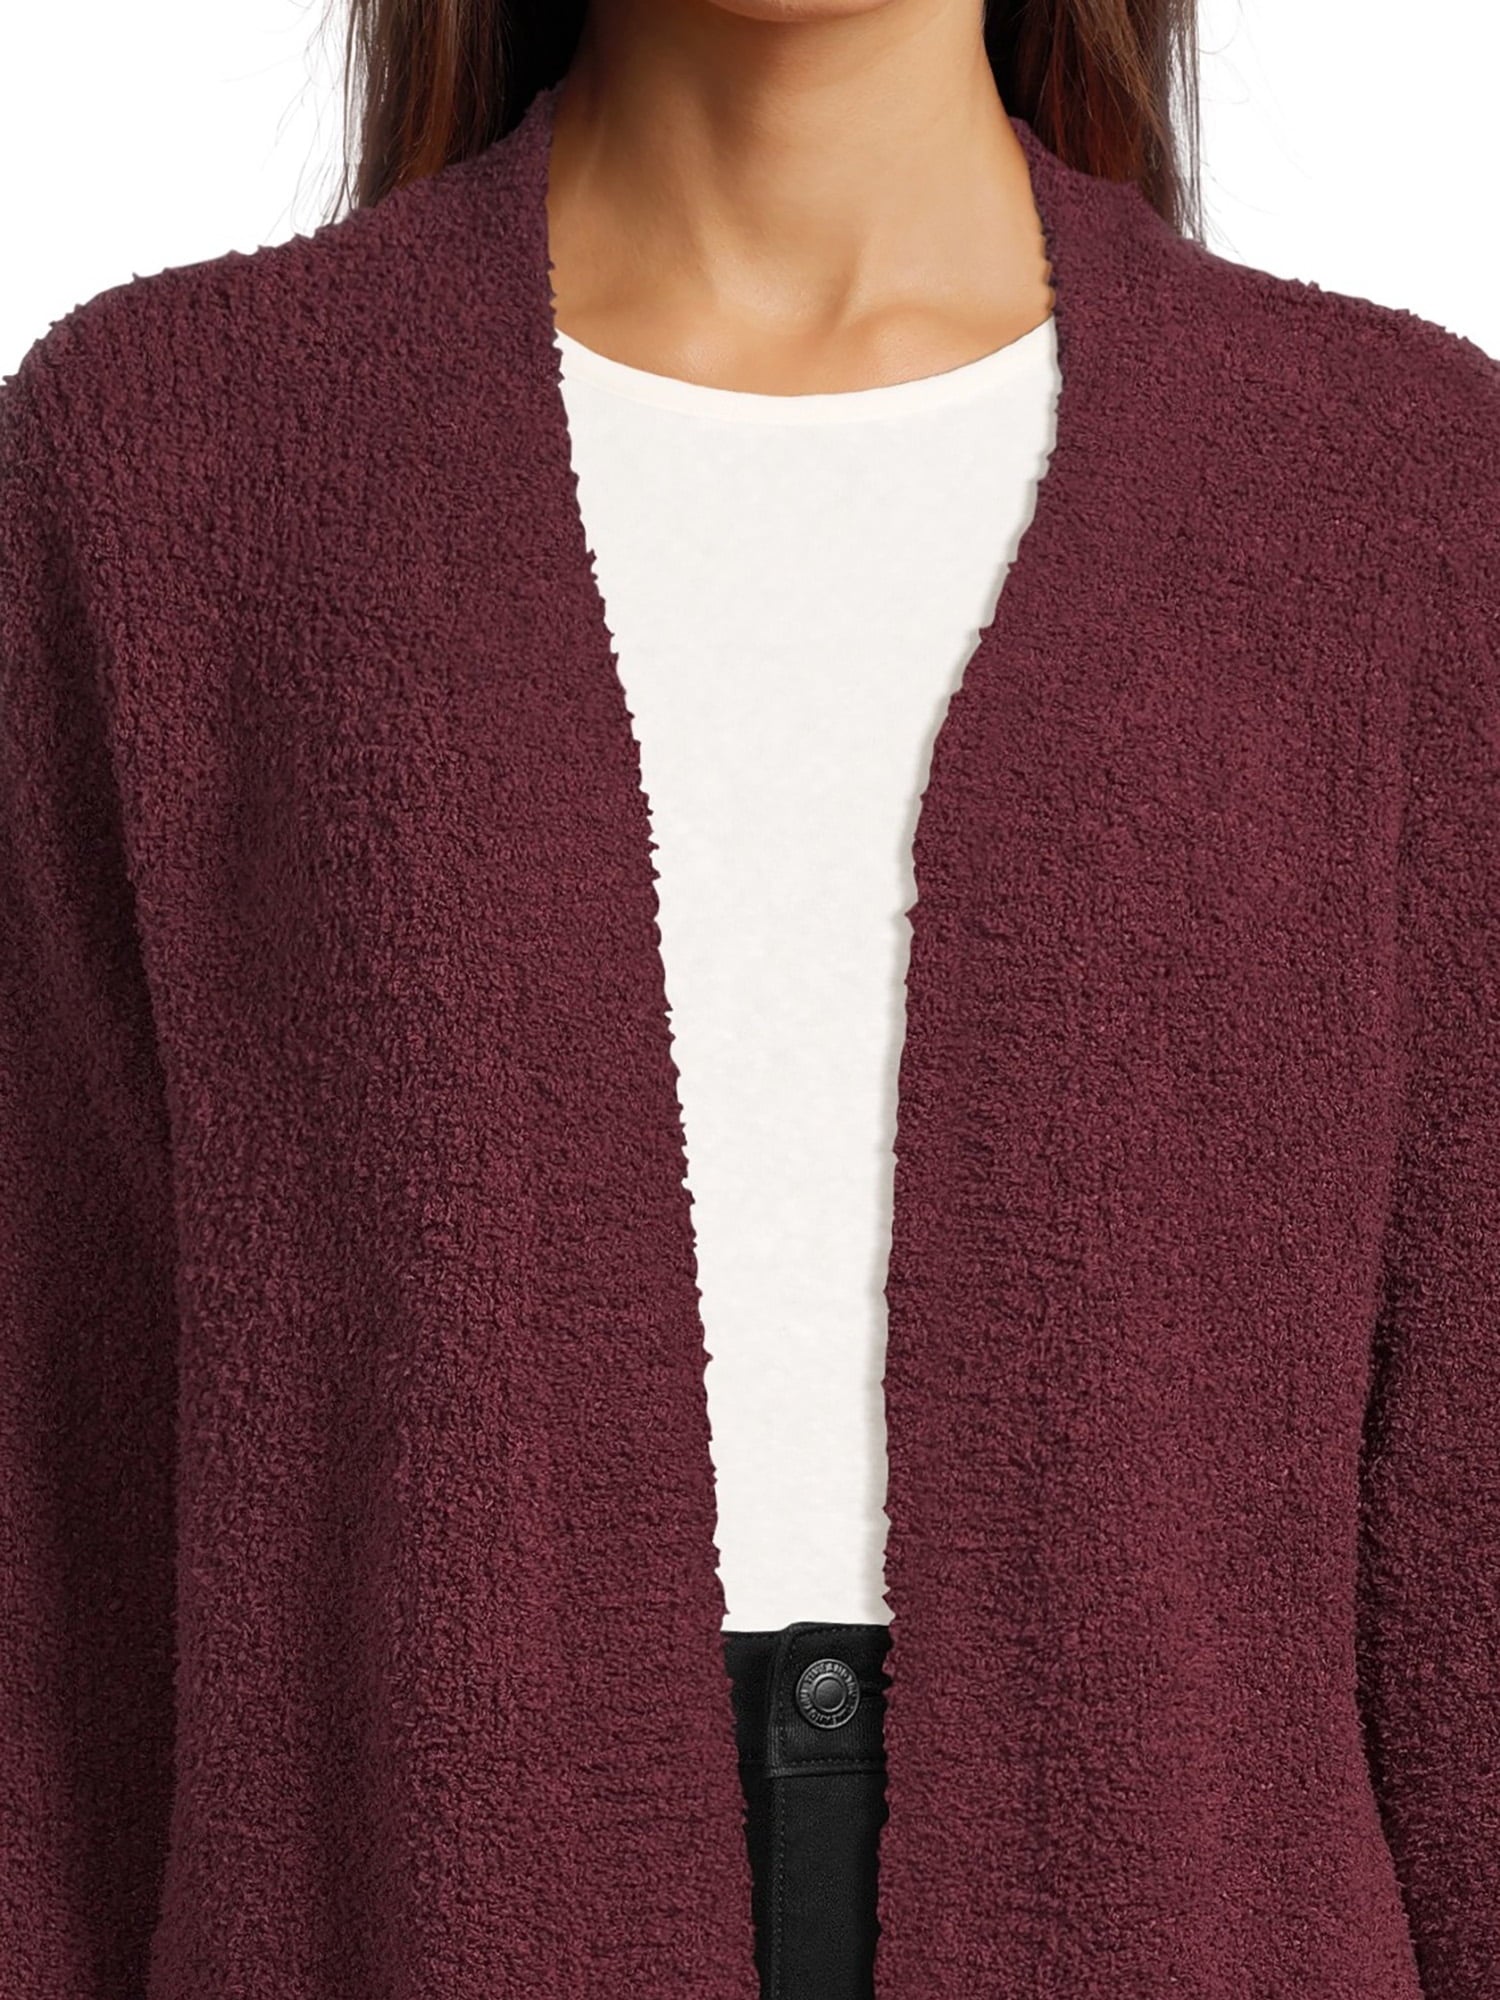 Time and Tru Women's Duster Cardigan Sweater, Midweight, Sizes XS-XXXL - image 4 of 5